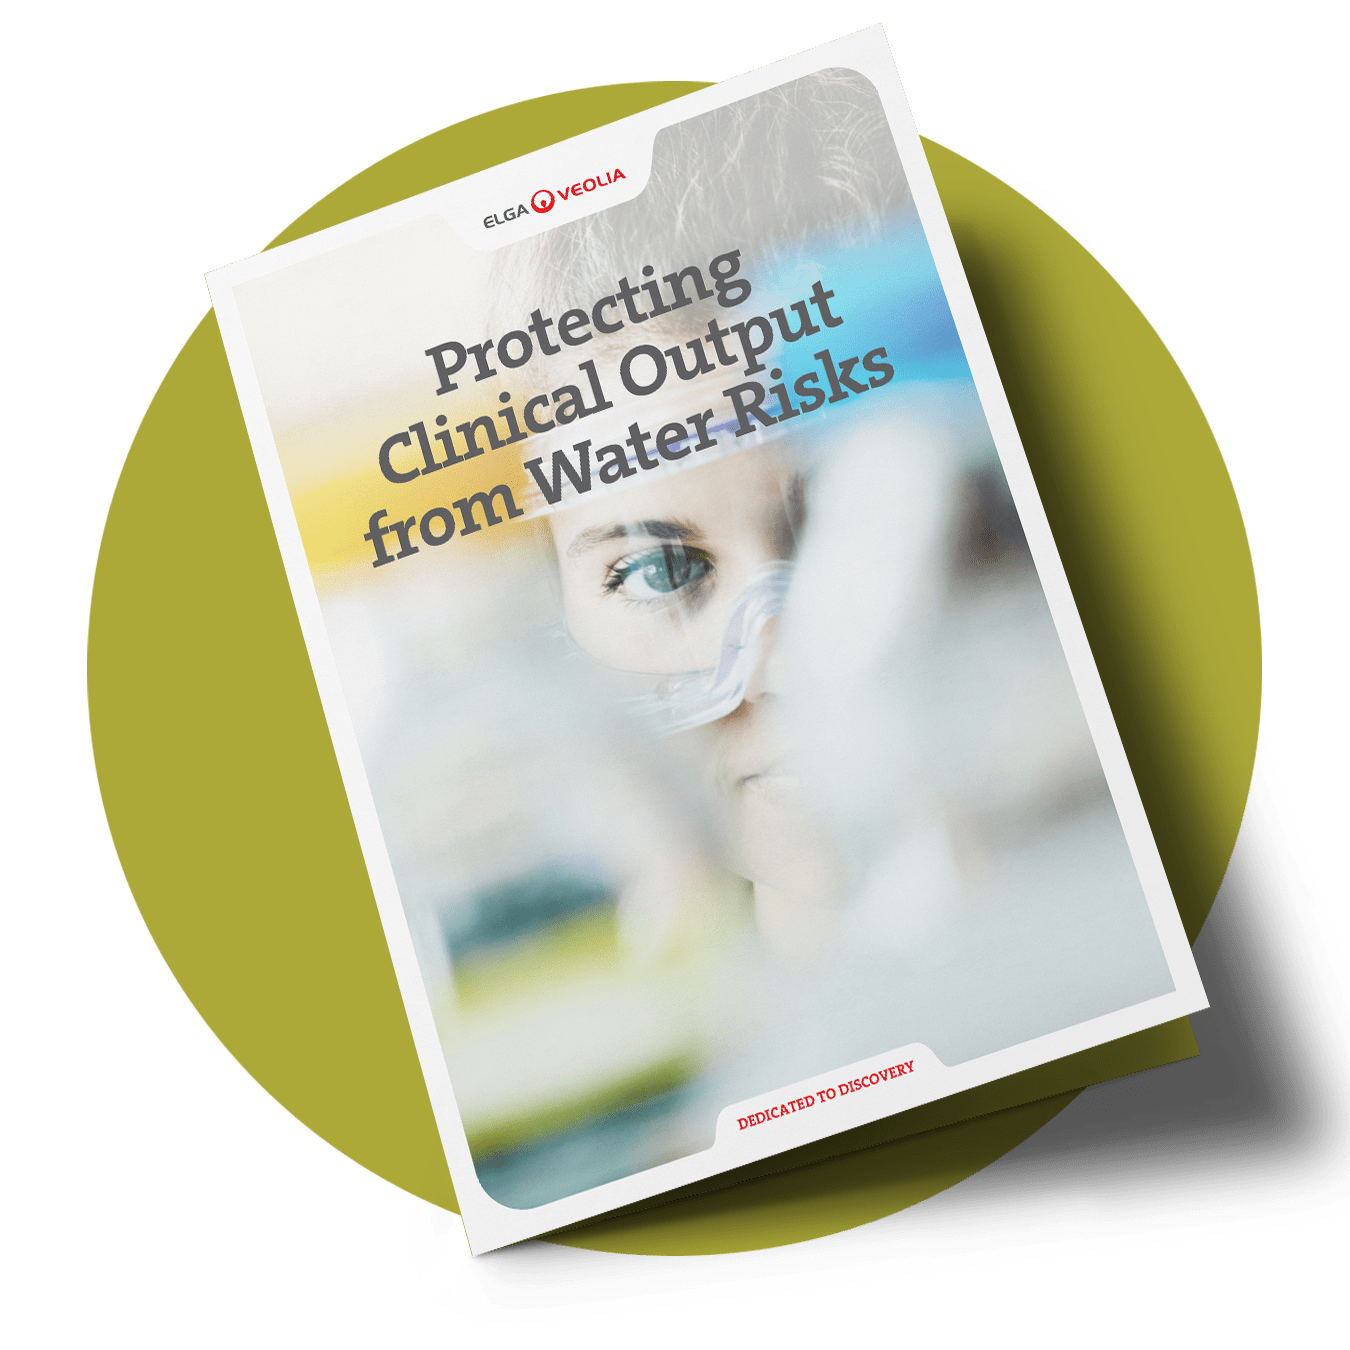 Protecting Clinical Output from Water Risks Thumbnail